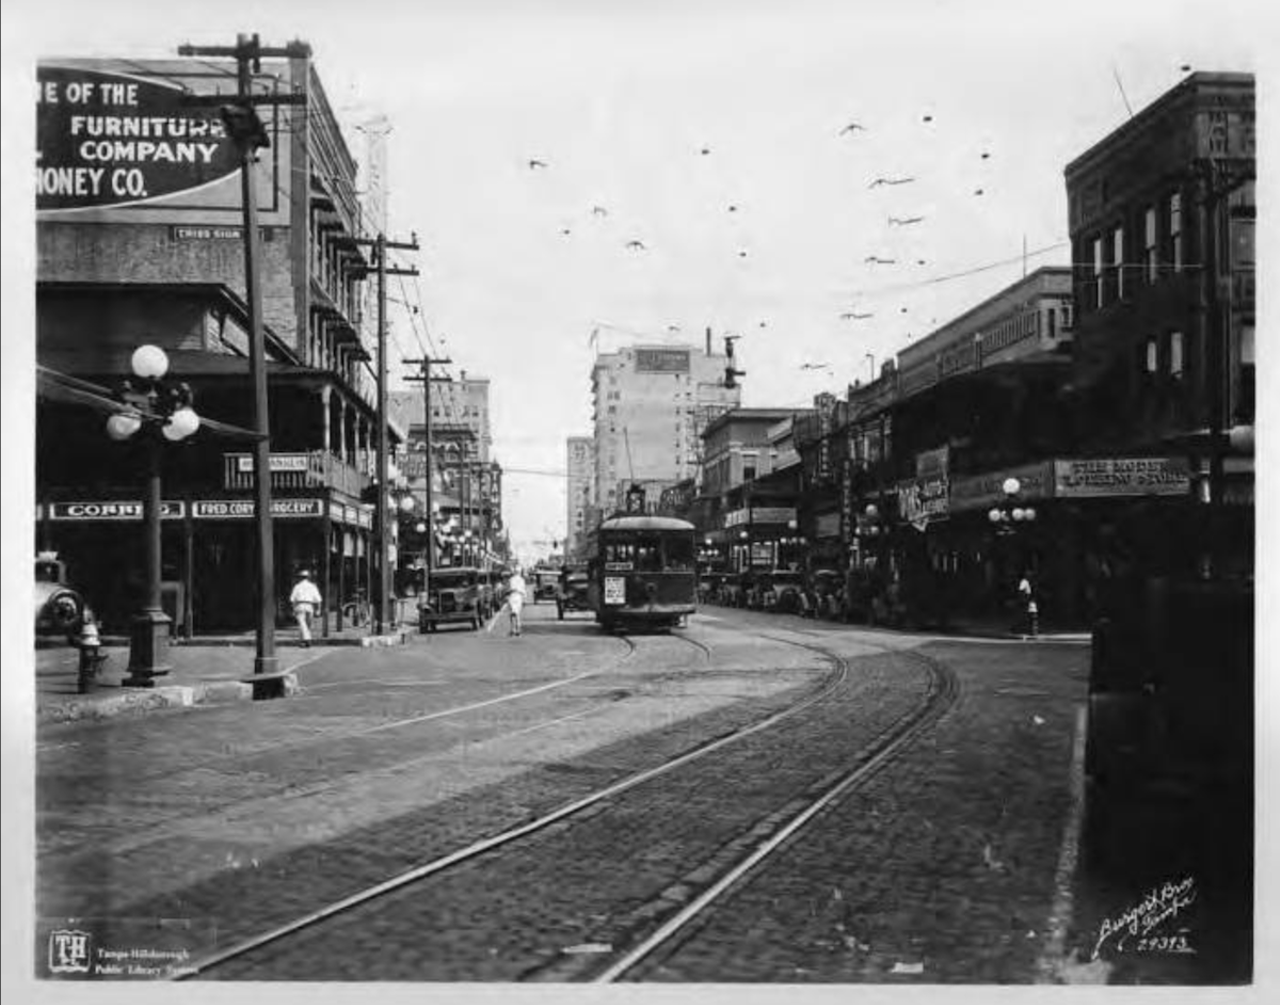 Franklin Street (1000 Block) facing south, with businesses, streetcar and traffic in Tampa, Florida in 1929.
Photo by Burgert Brothers via ia Tampa-Hillsborough County Public Library System